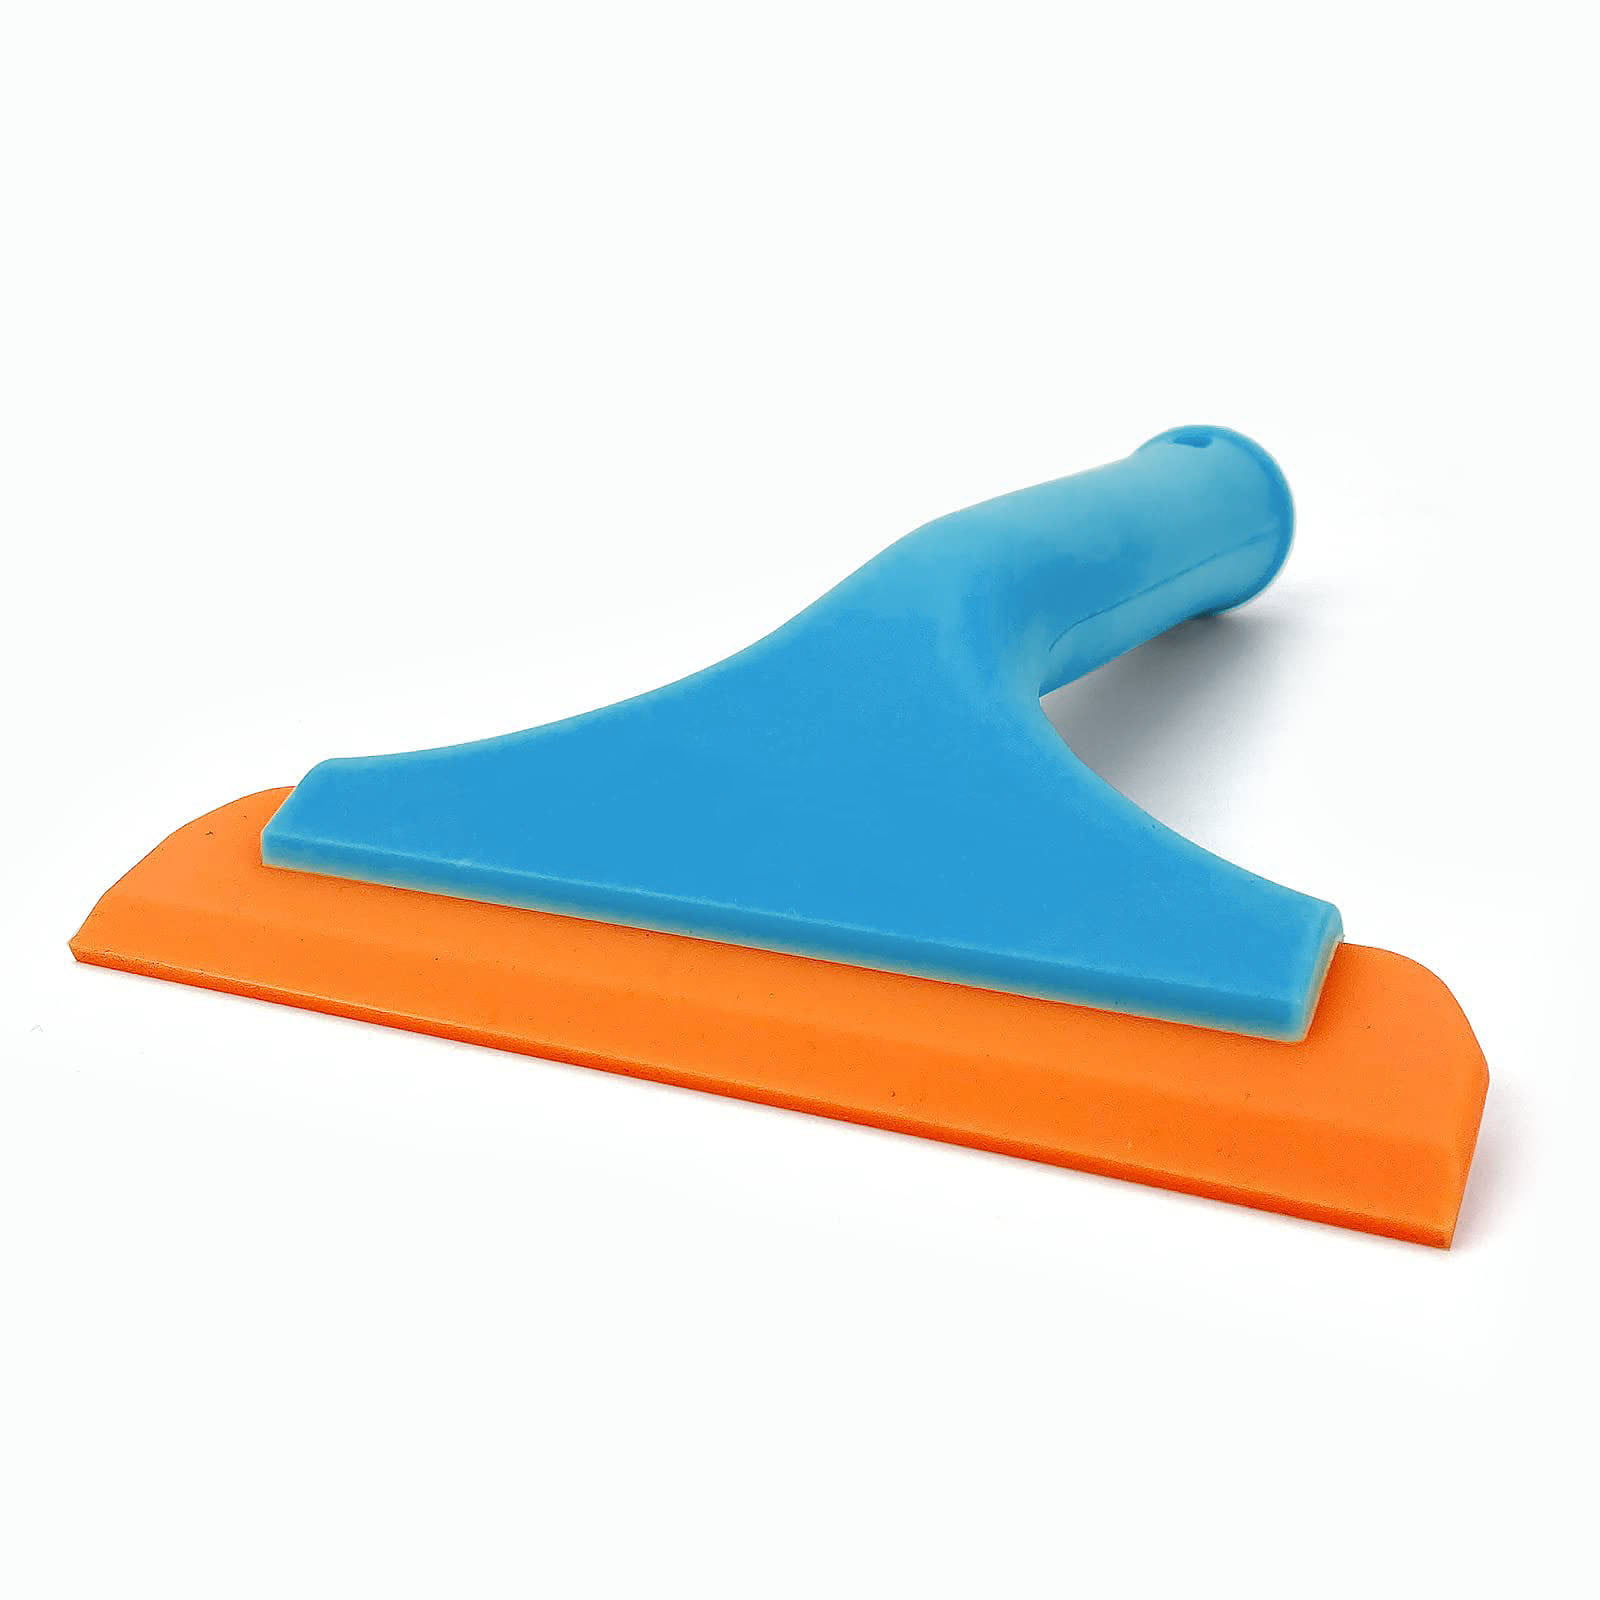 Wapodeai Small Squeegee 5.5 Inch Silicon Squeegee, Window, Shower Door,  Glass, Car Windshield, Blue